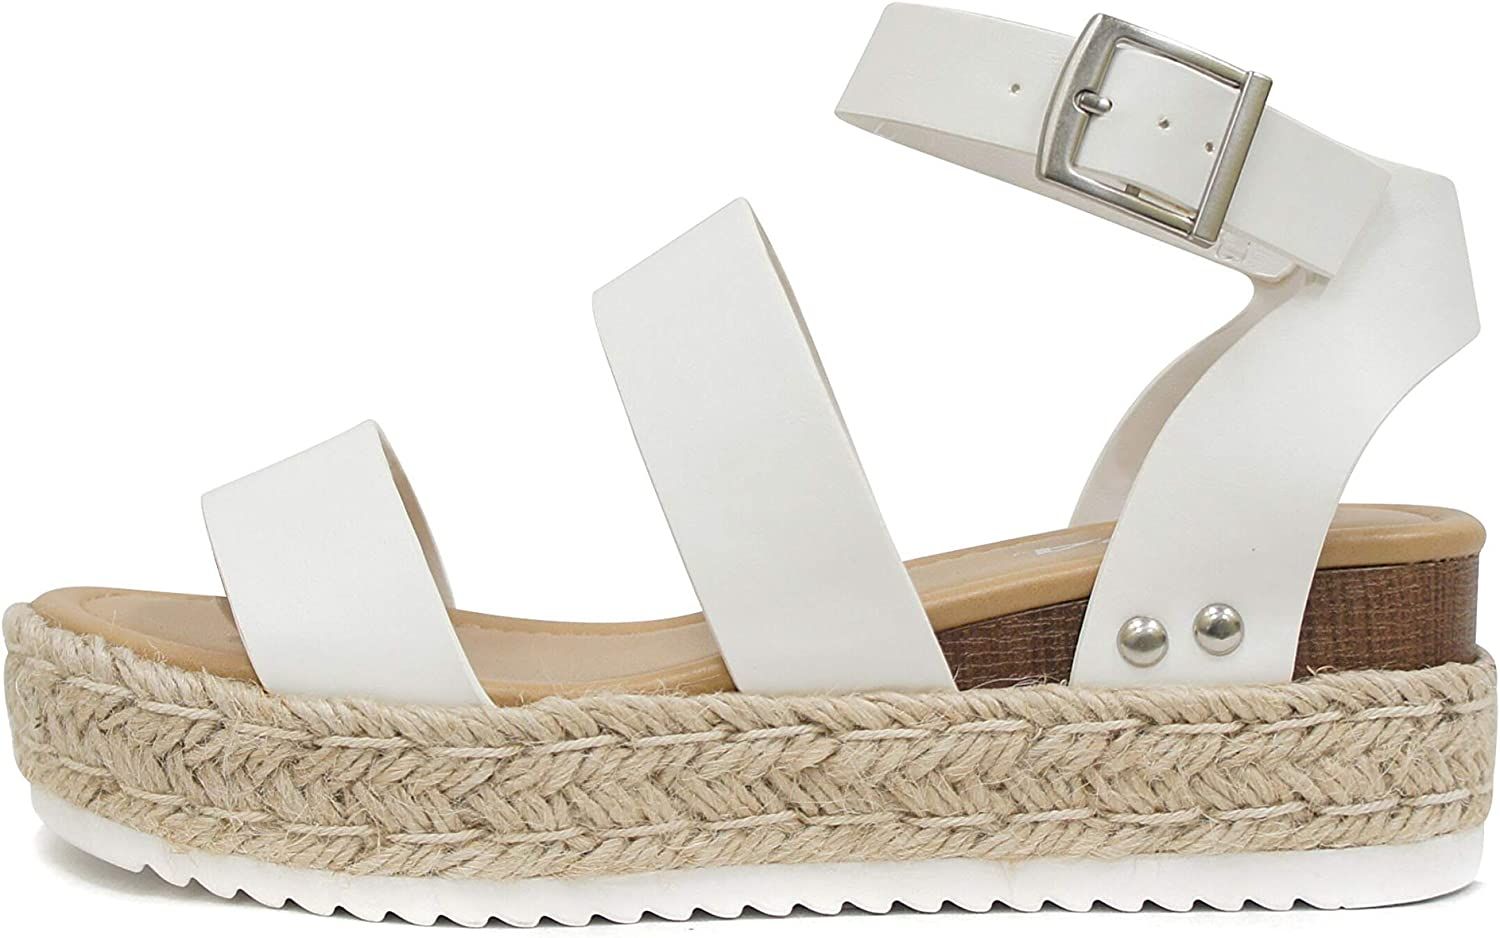 Soda Women's Topic Open Toe Buckle Ankle Strap Espadrille Synthetic sandals | Amazon (US)